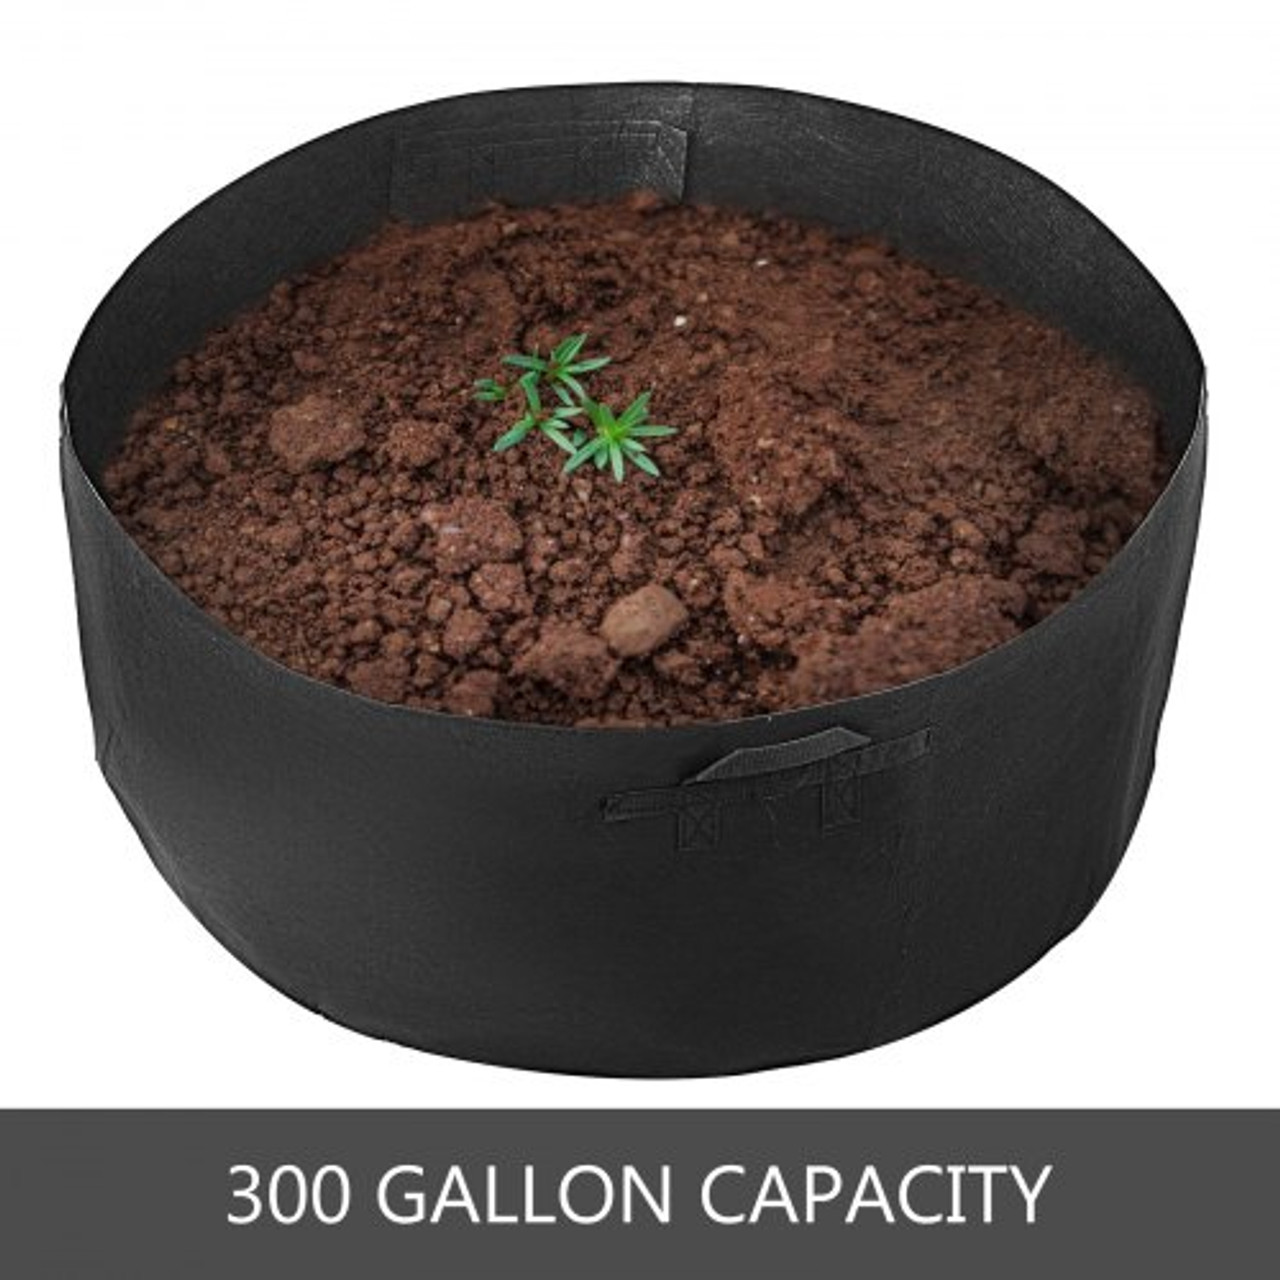 10-Pack 300 Gallon Plant Grow Bag Aeration Fabric Pots with Handles Black Grow Bag Plant Container for Garden Planting Washable and Reusable (10-Pack 300 Gallon)